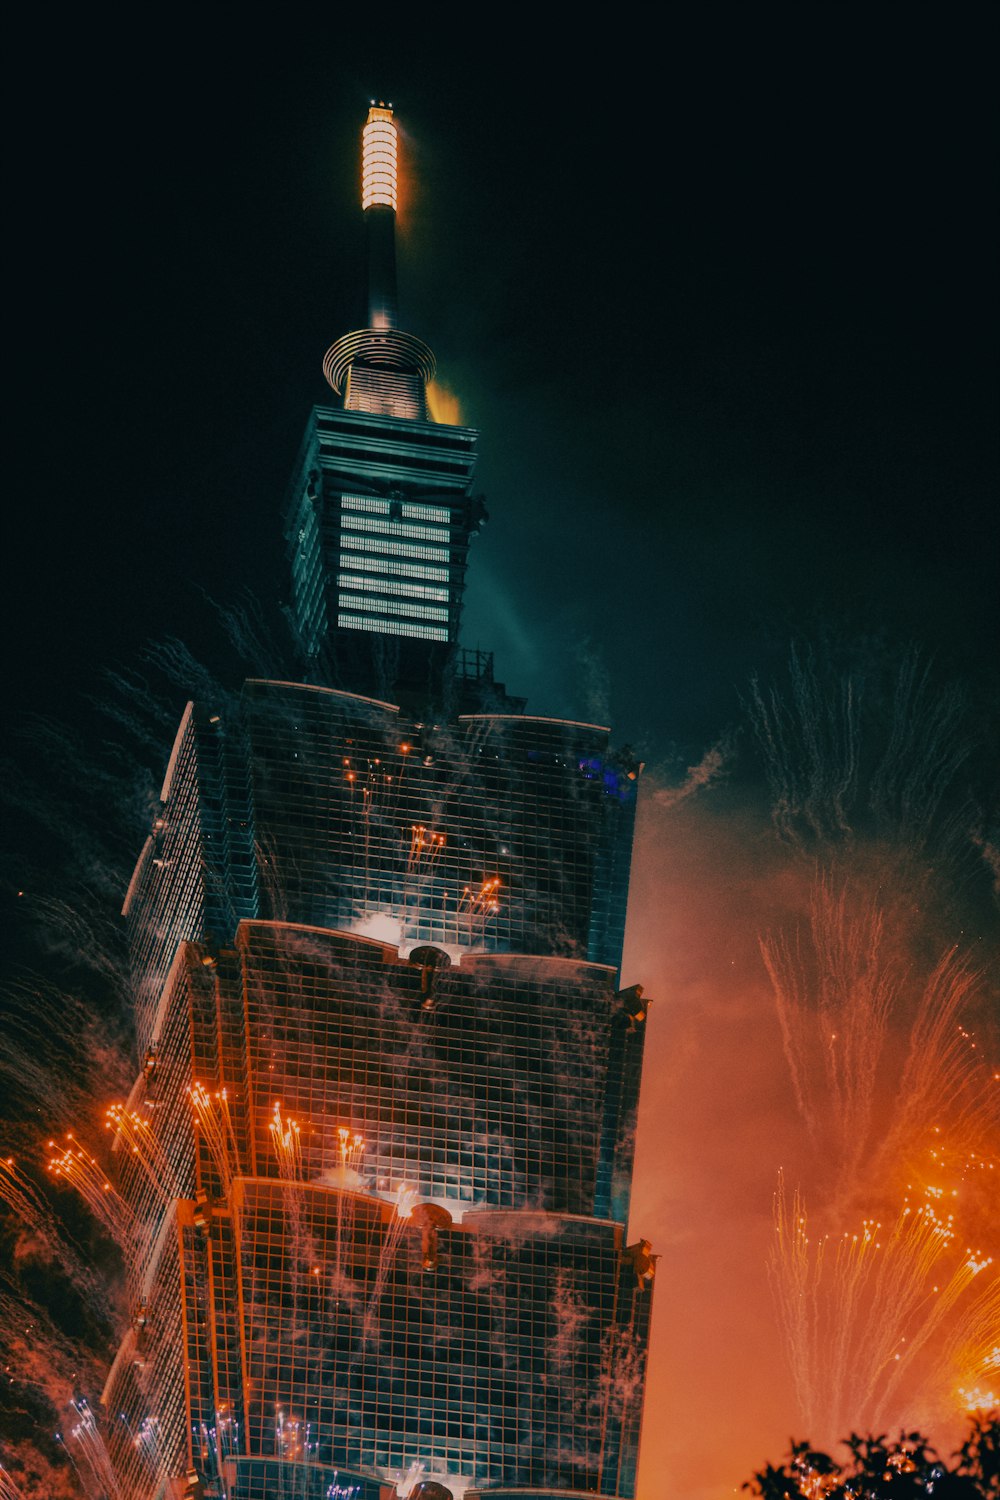 fireworks are lit up in the night sky above a skyscraper